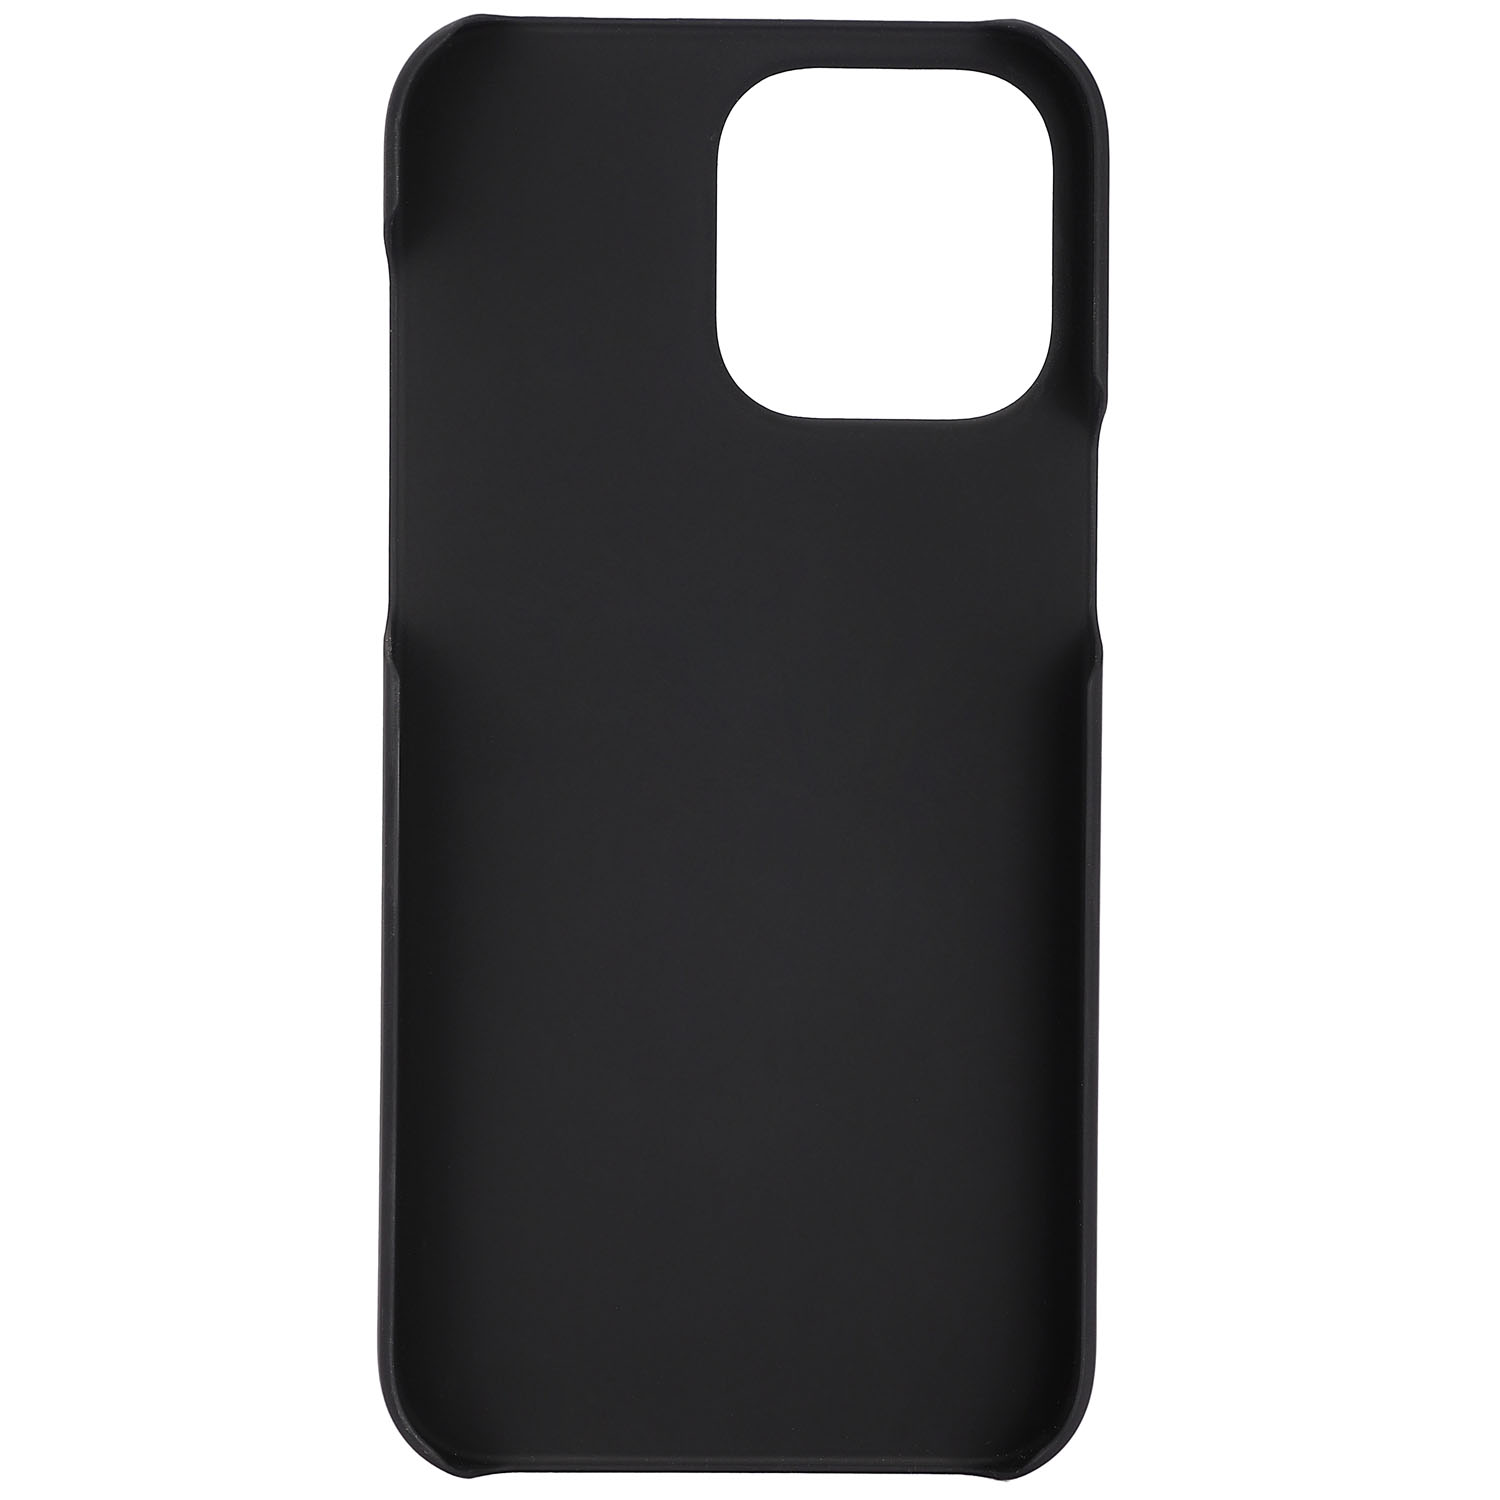 KRUSELL Leder 14 Pro iPhone Schwarz Pro Schwarz, Apple, 14 Max iPhone Backcover, Max, CardCover